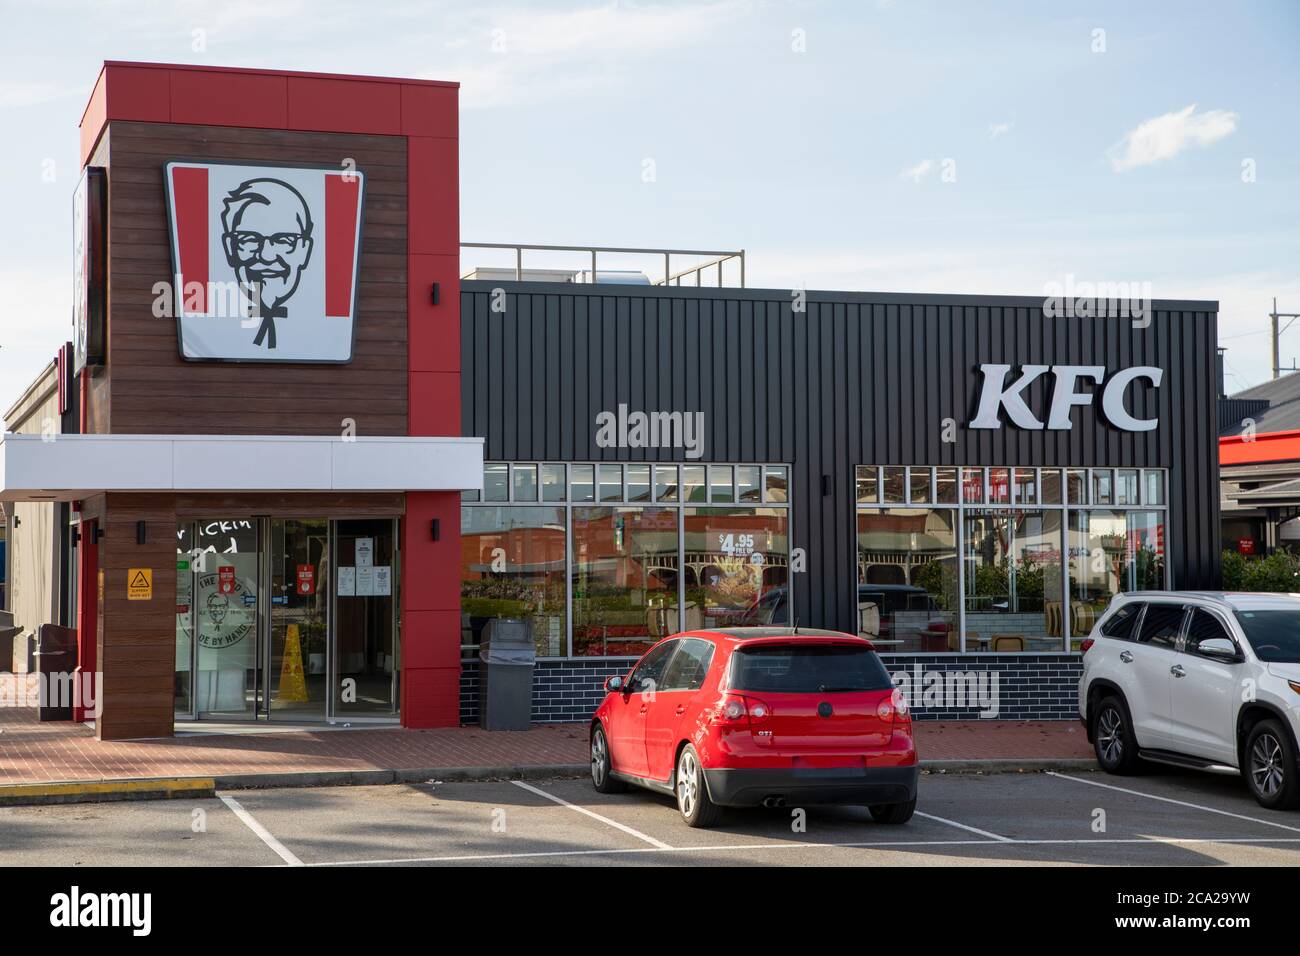 Kfc Entrance High Resolution Stock Photography and Images - Alamy